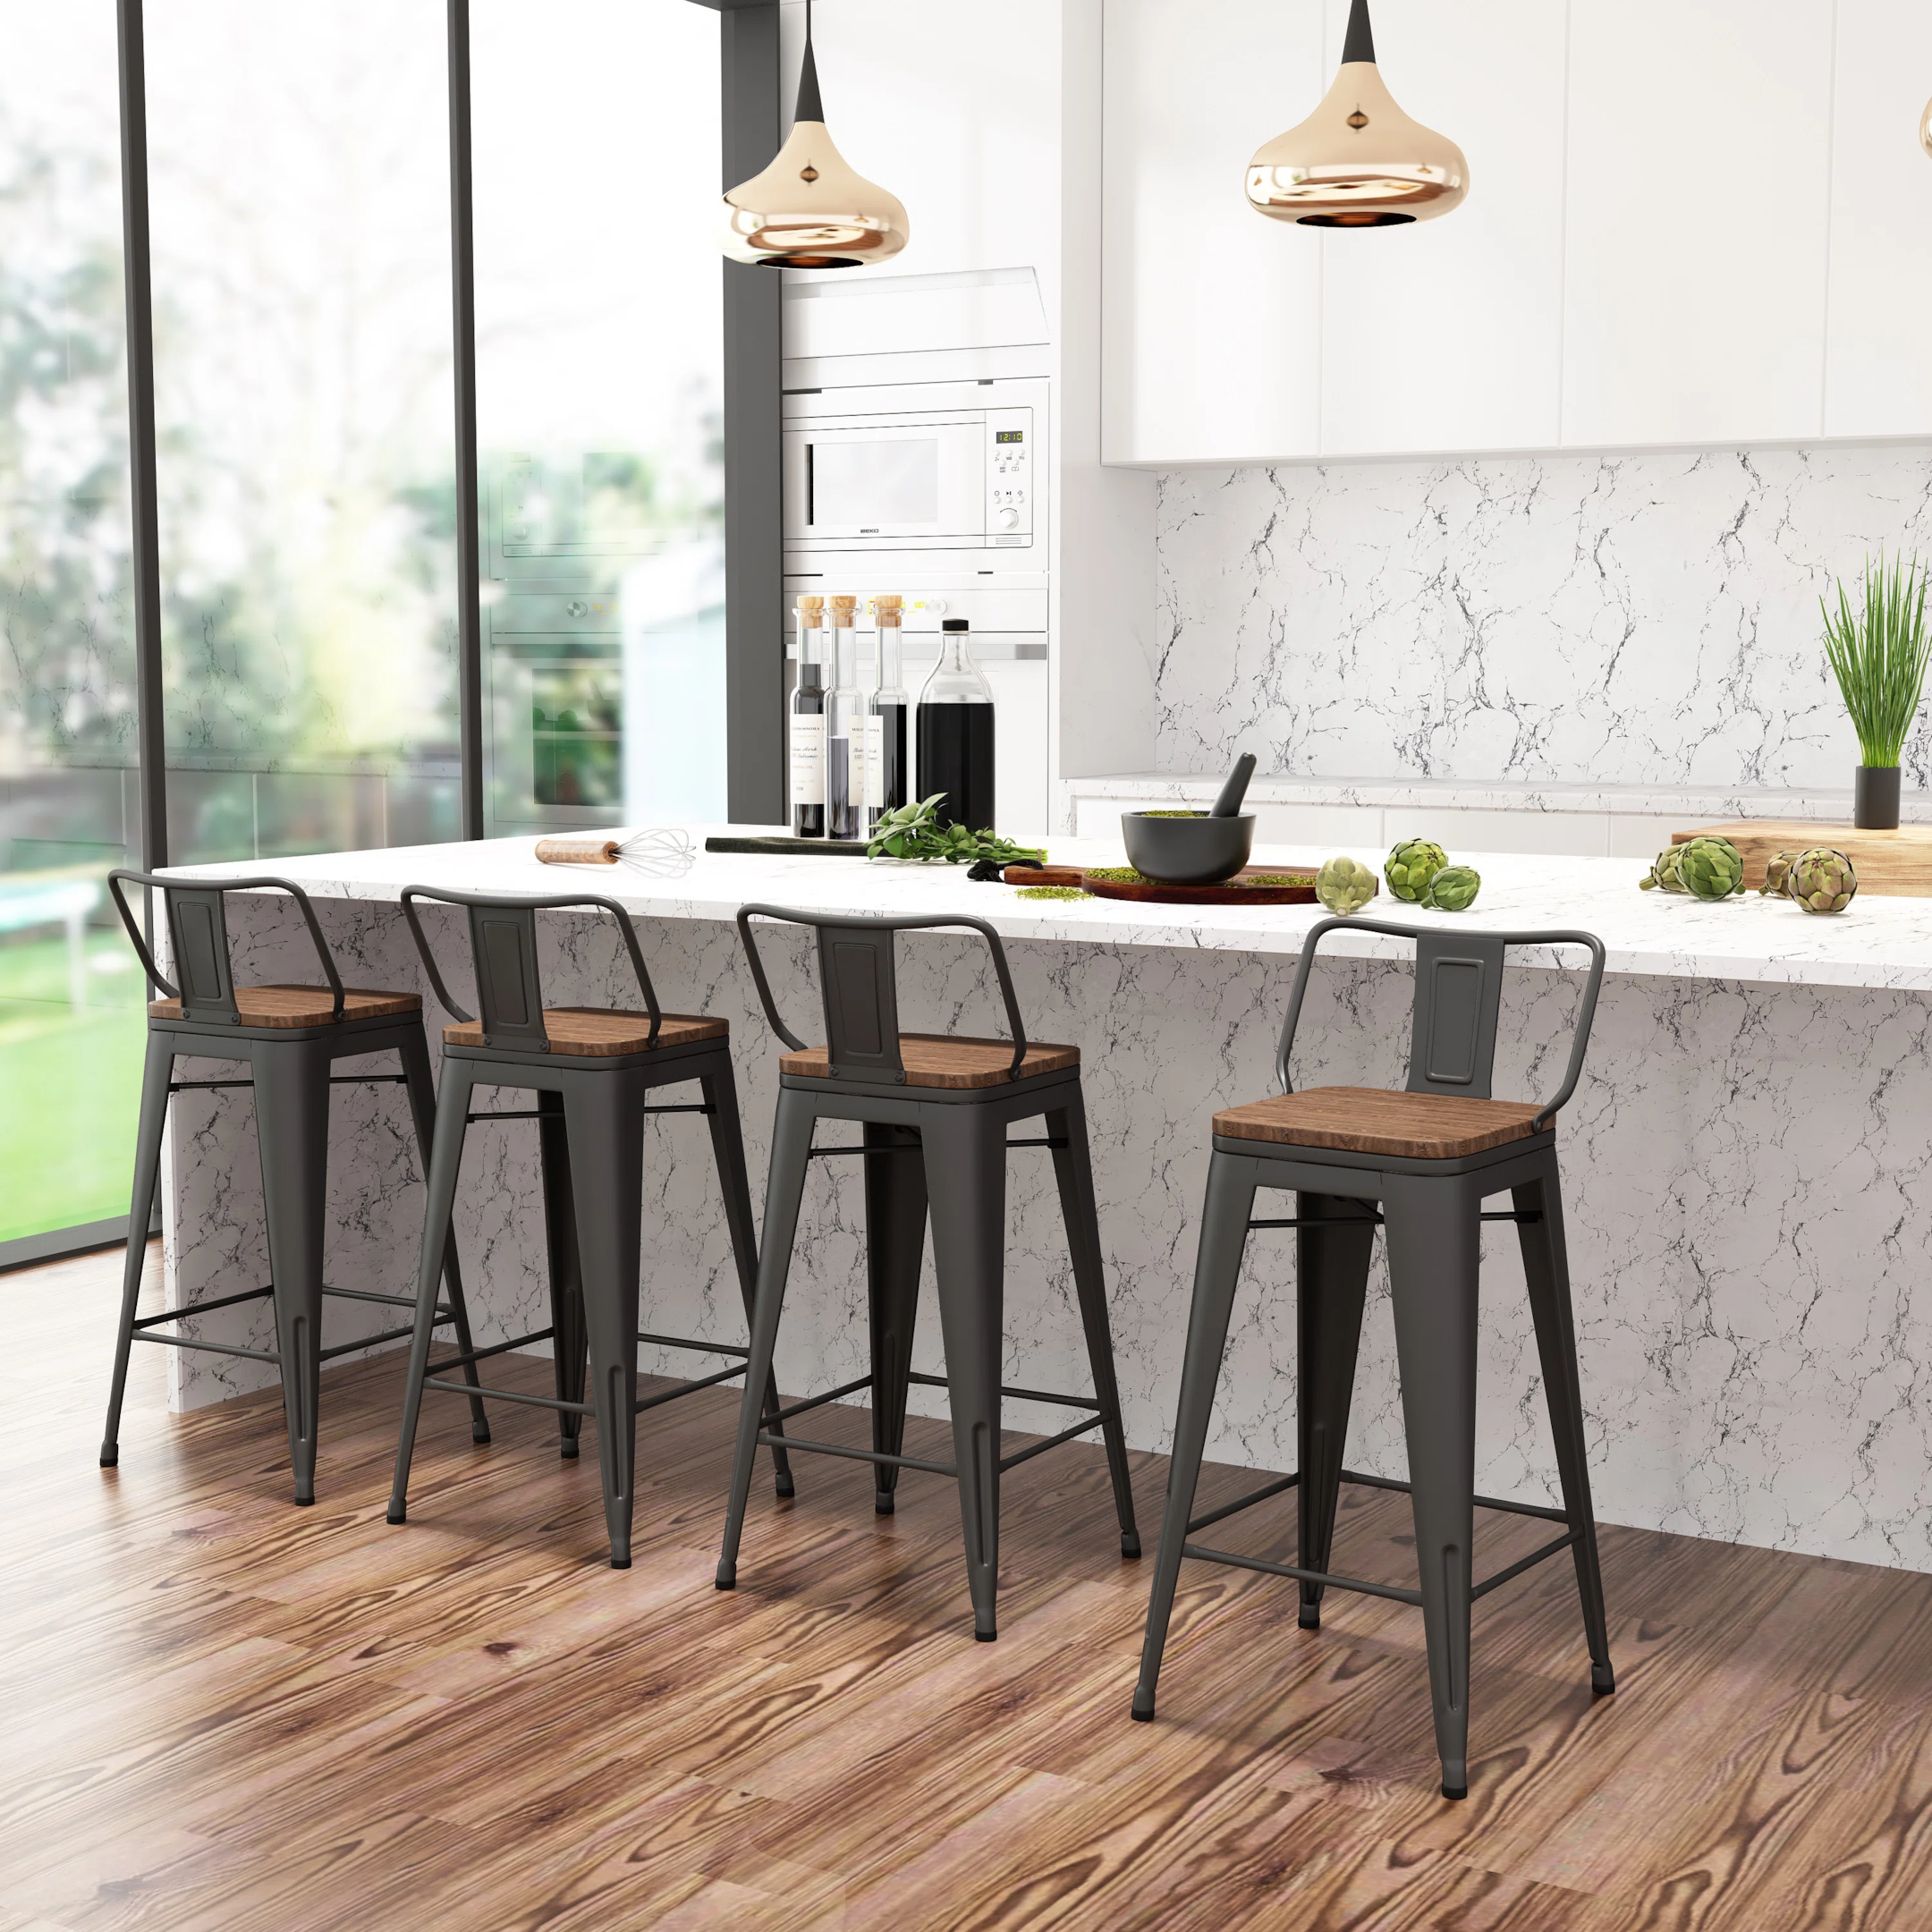 Bar and counter stools from Frontgate